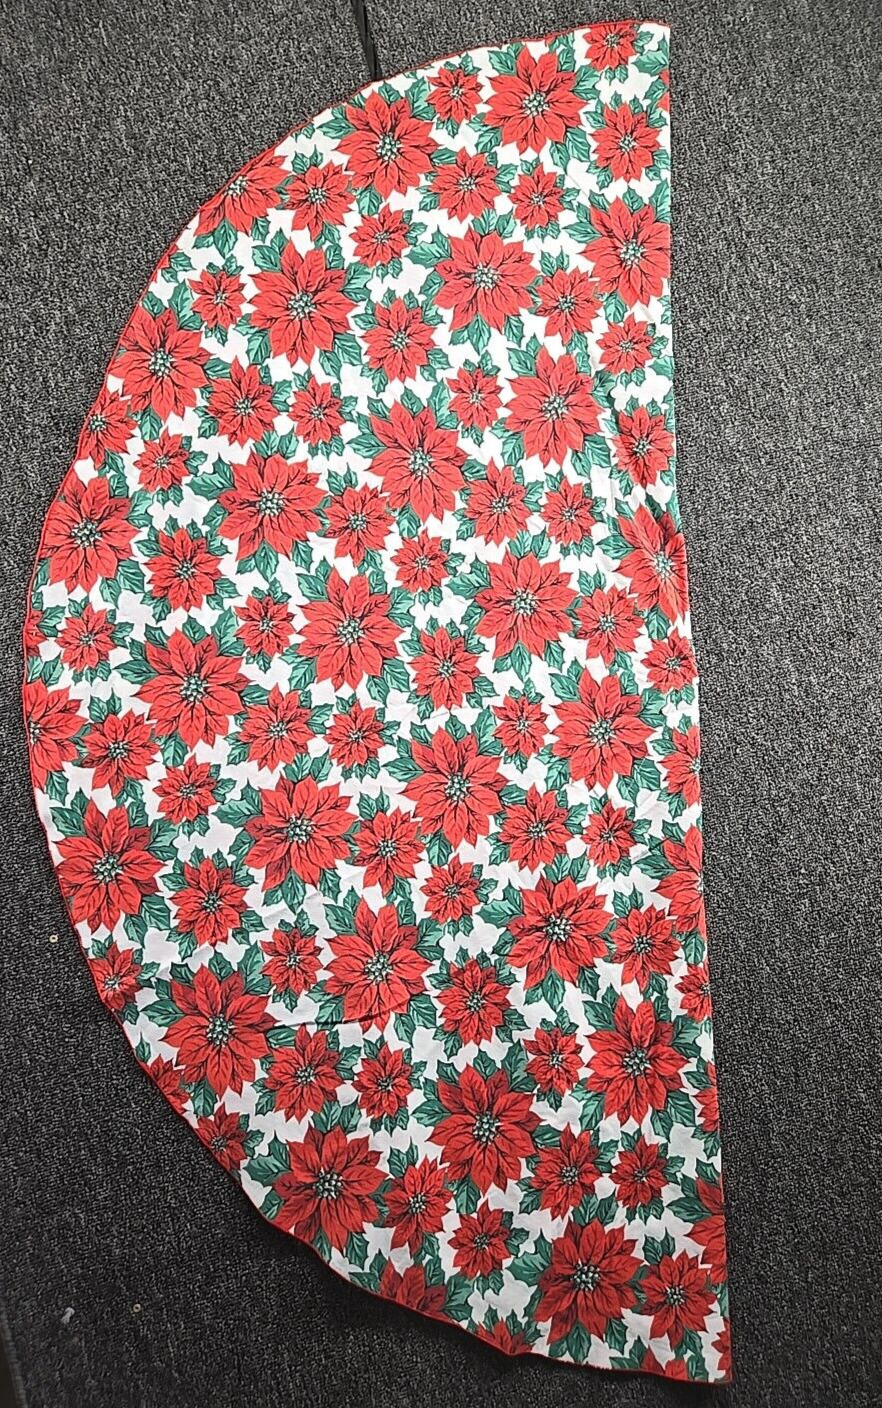 Vintage 60s Christmas Tablecloth 56 Inch Round Holiday Poinsettia Red Green